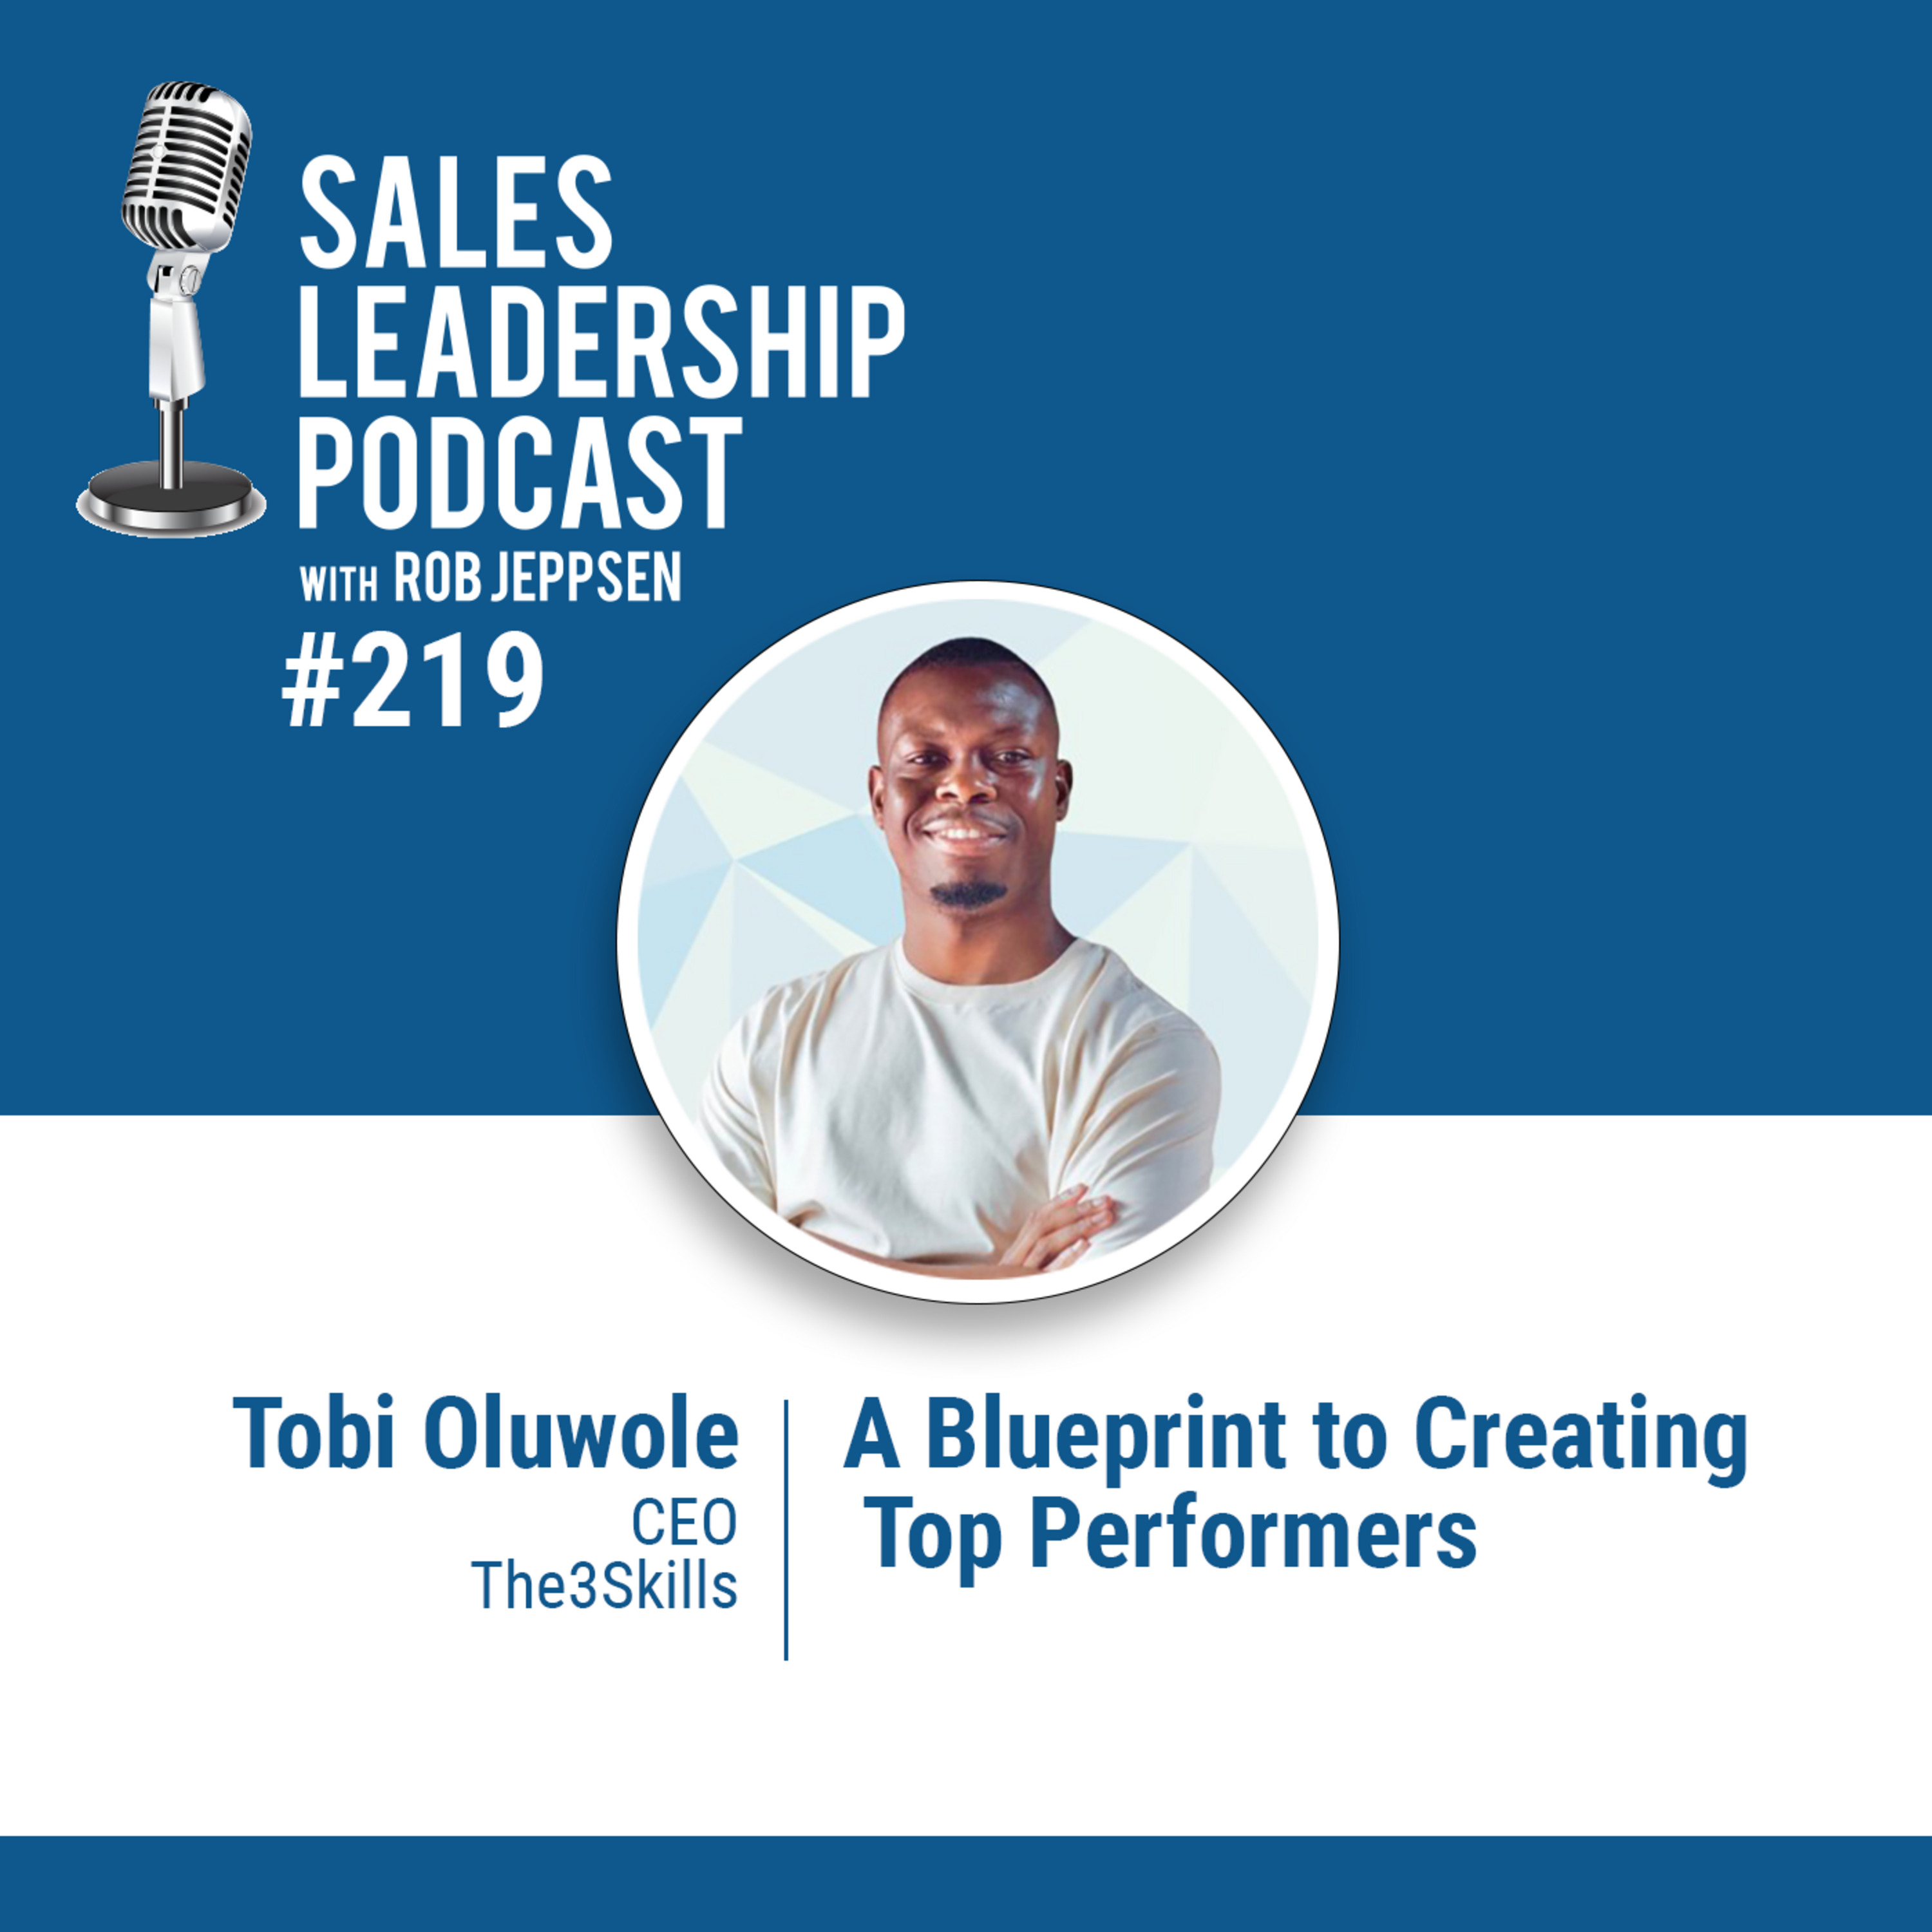 Episode 220: #219: Tobi Oluwole, CEO of The3Skills  —  A Blueprint to Creating Top Performers